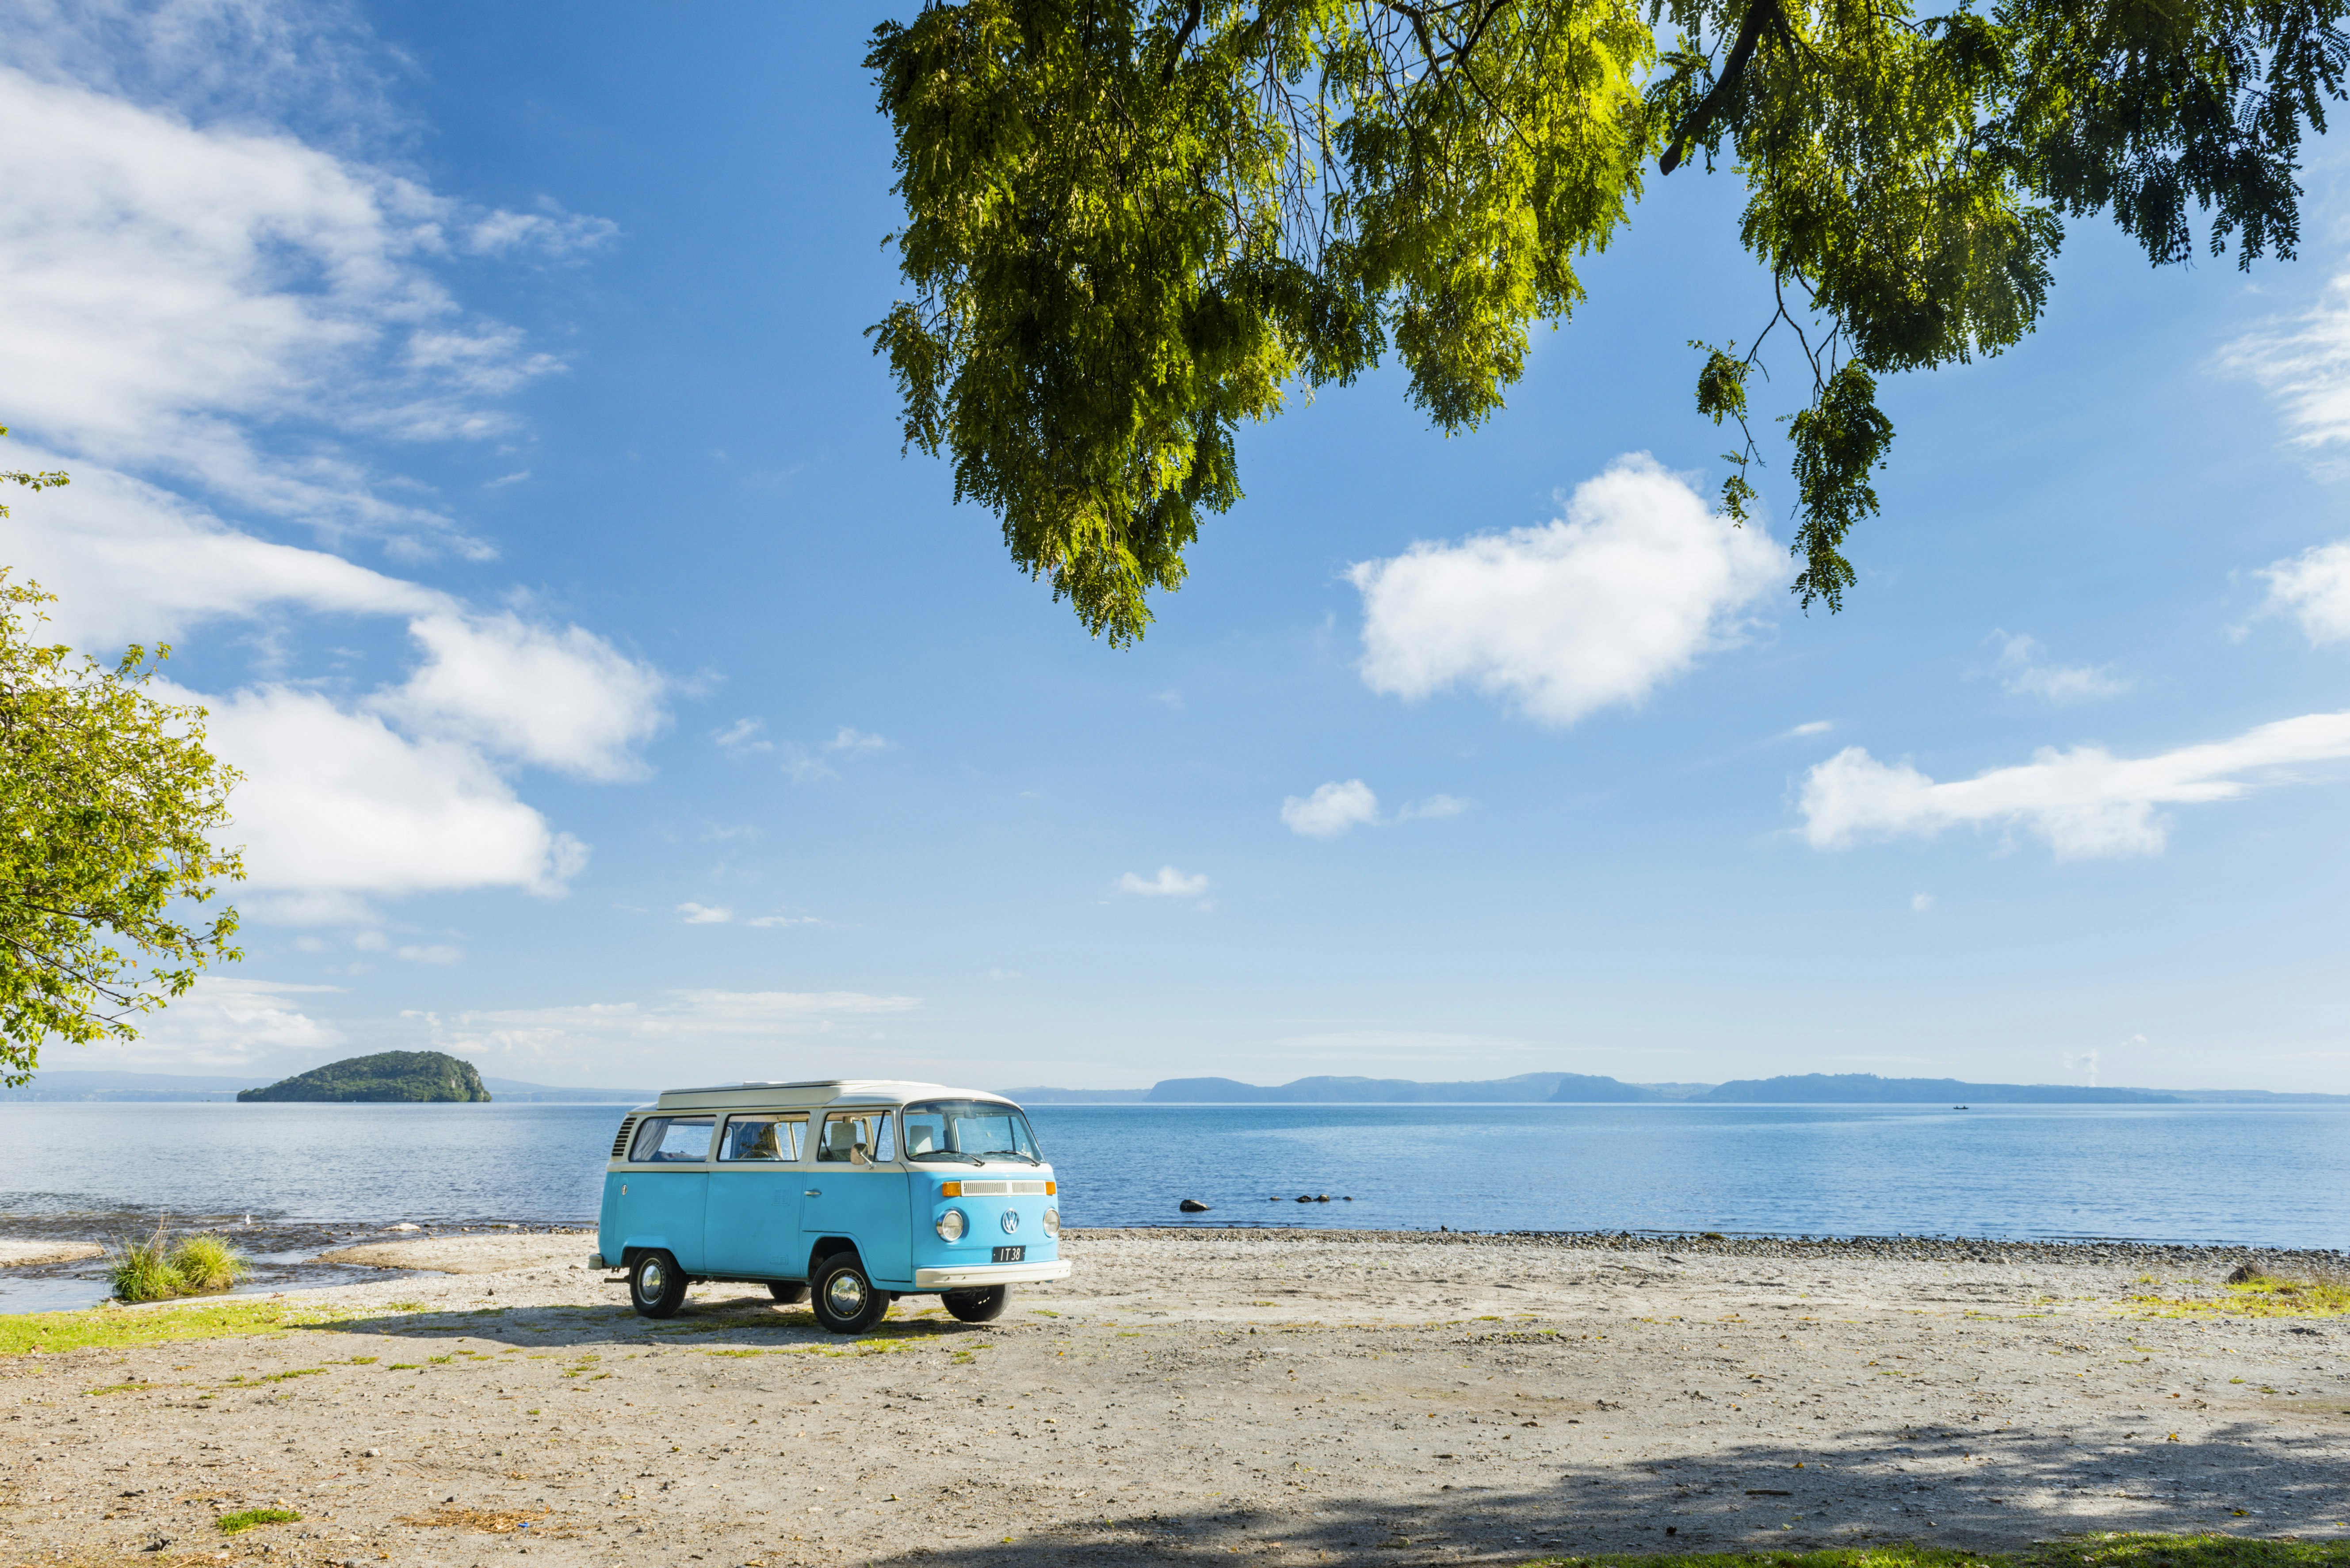 A blue VW camper van parked on a sandy beach with a lake in the background